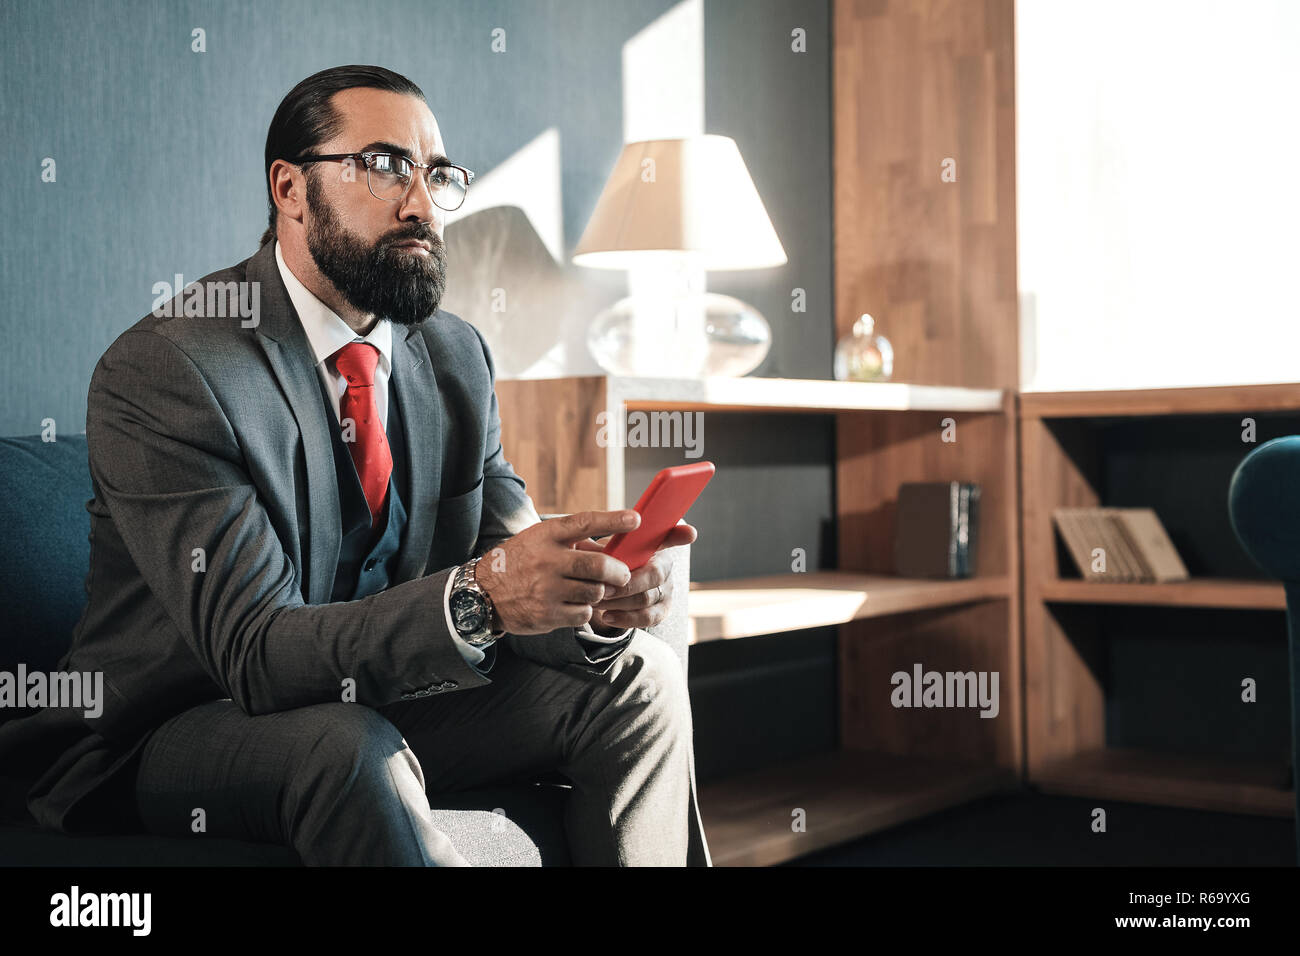 Bearded man wearing business attire feeling concerned before negotiation Stock Photo